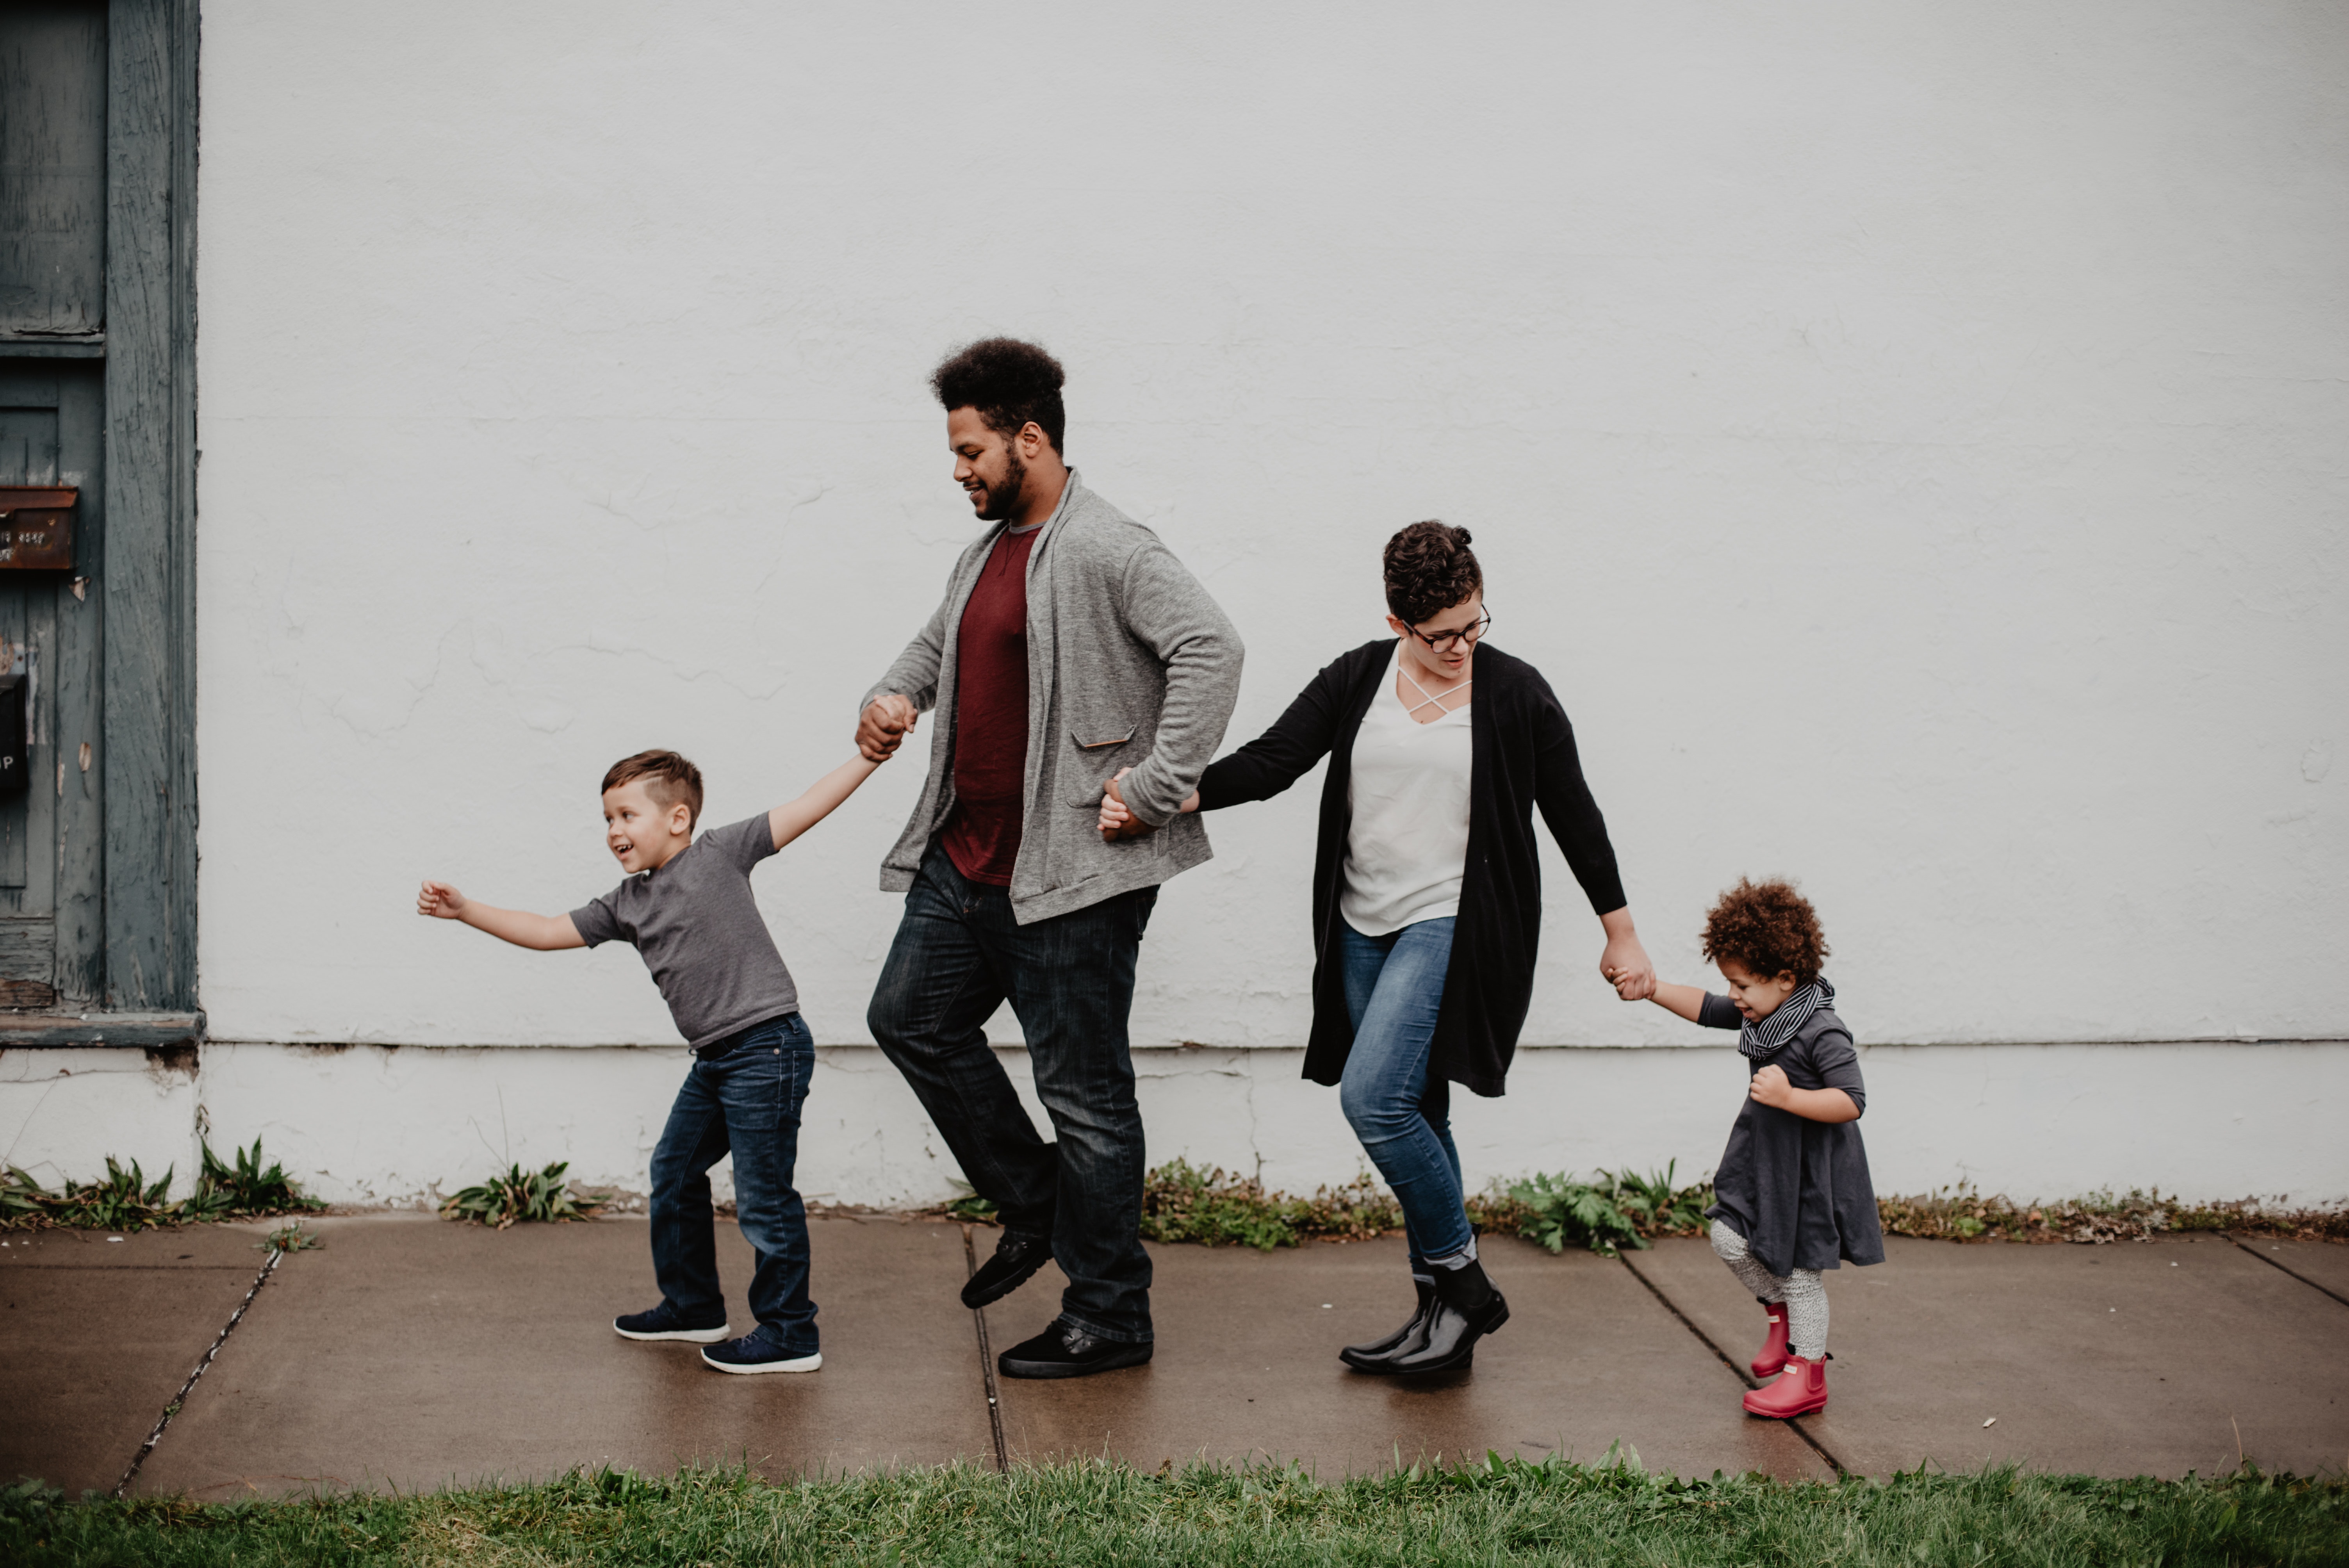 This image is of a family of four walking on the pavement. All four of them are walking holding hands. There are two kids, one boy, and one girl child. The pavement appears to be wet, which may be from the earlier rain. Both parents are wearing sweatshirts on top of the t-shirts.